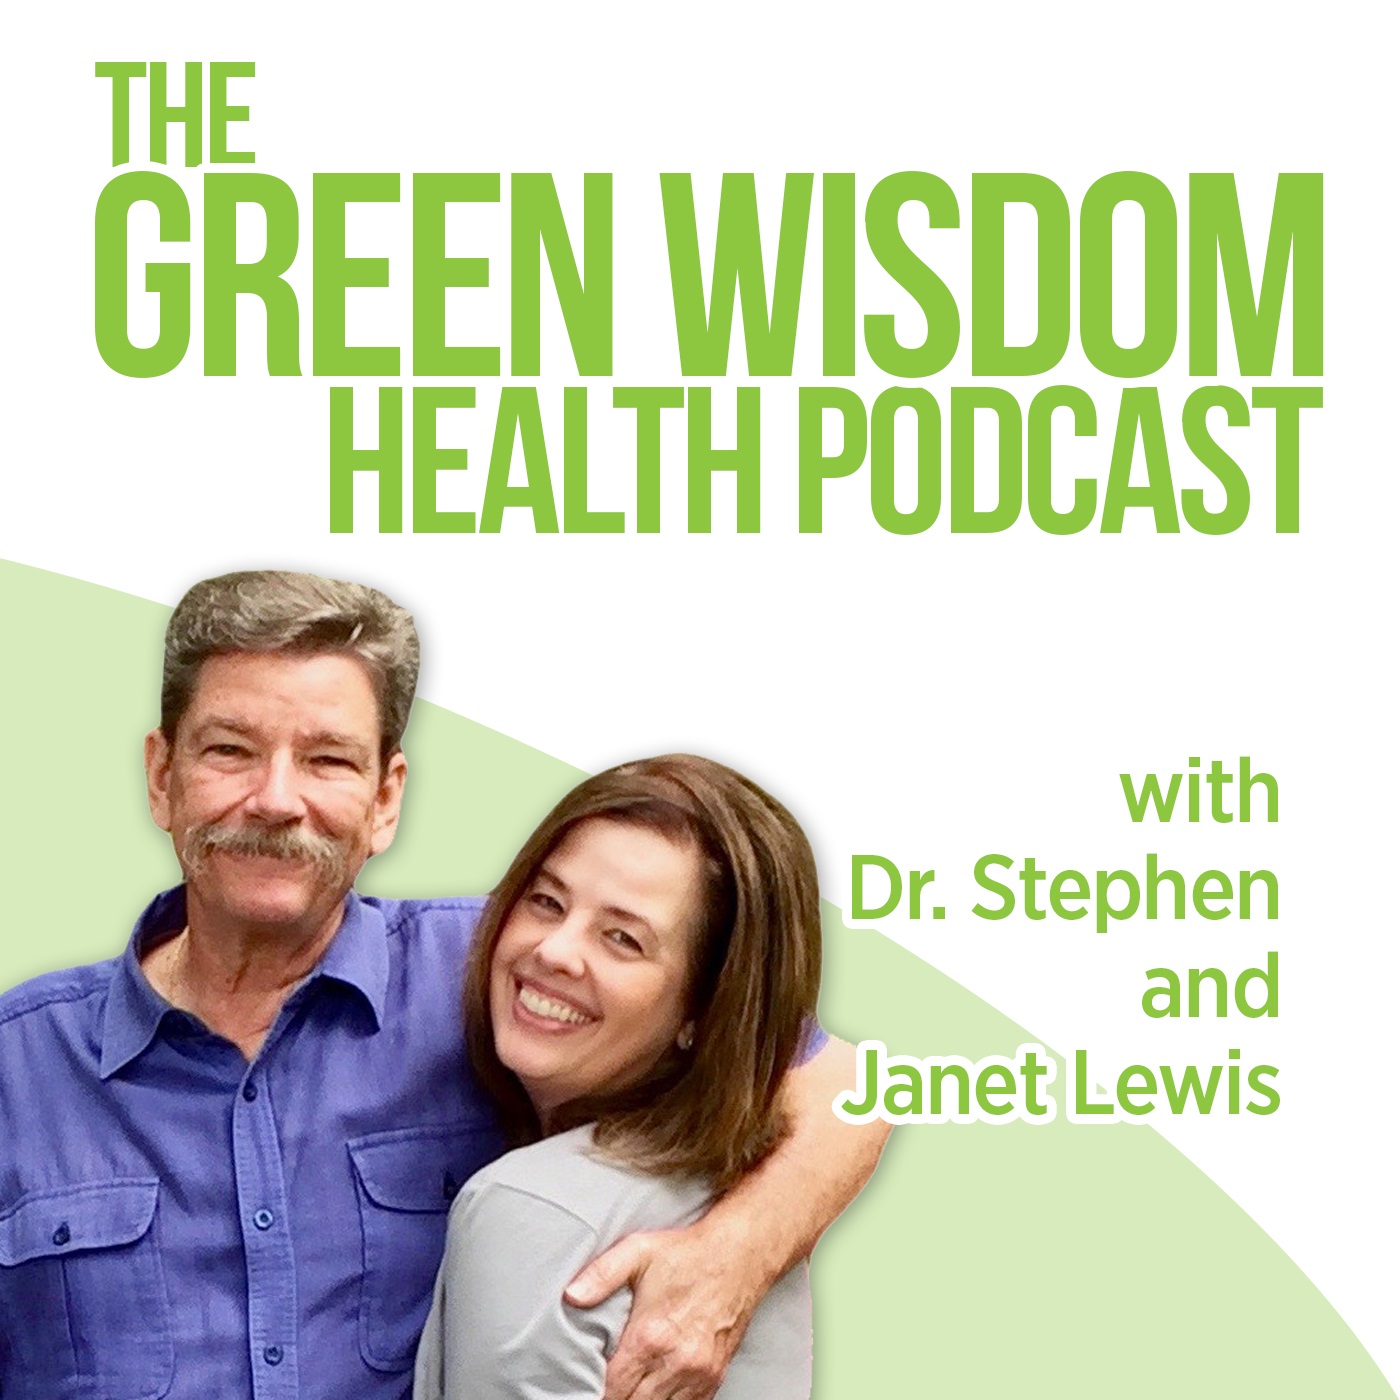 Green Wisdom Health Podcast by Dr. Stephen and Janet Lewis